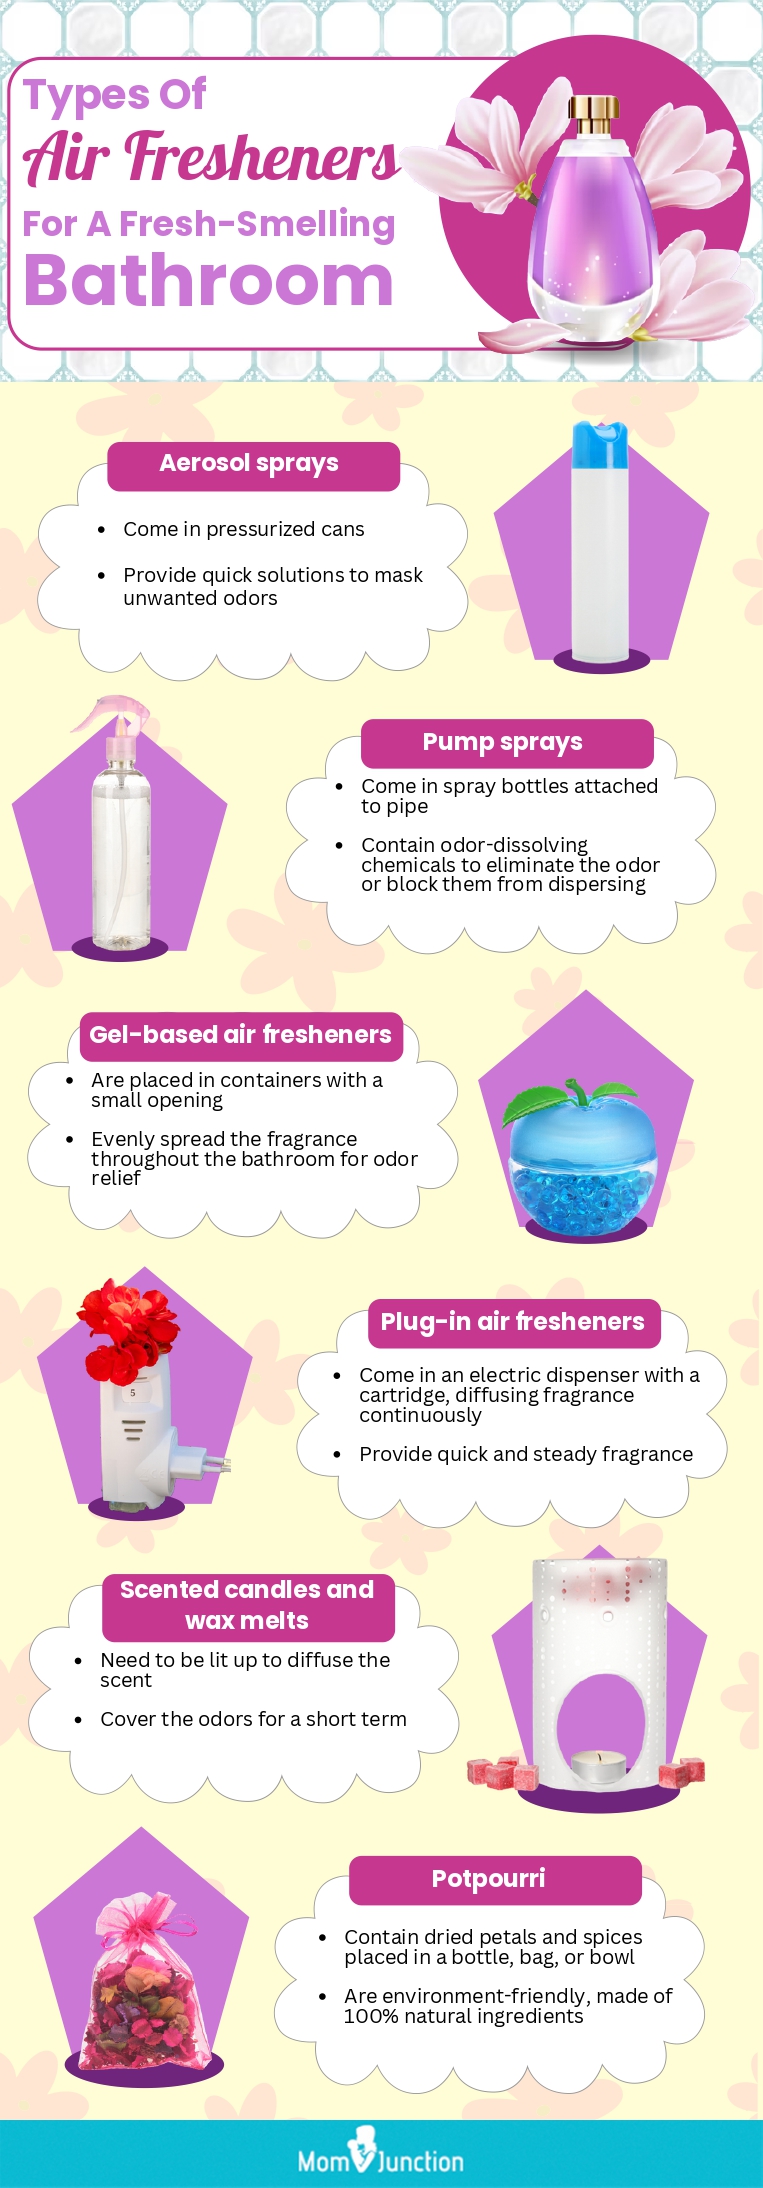 Types Of Air Fresheners For A Fresh Smelling Bathroom (infographic)